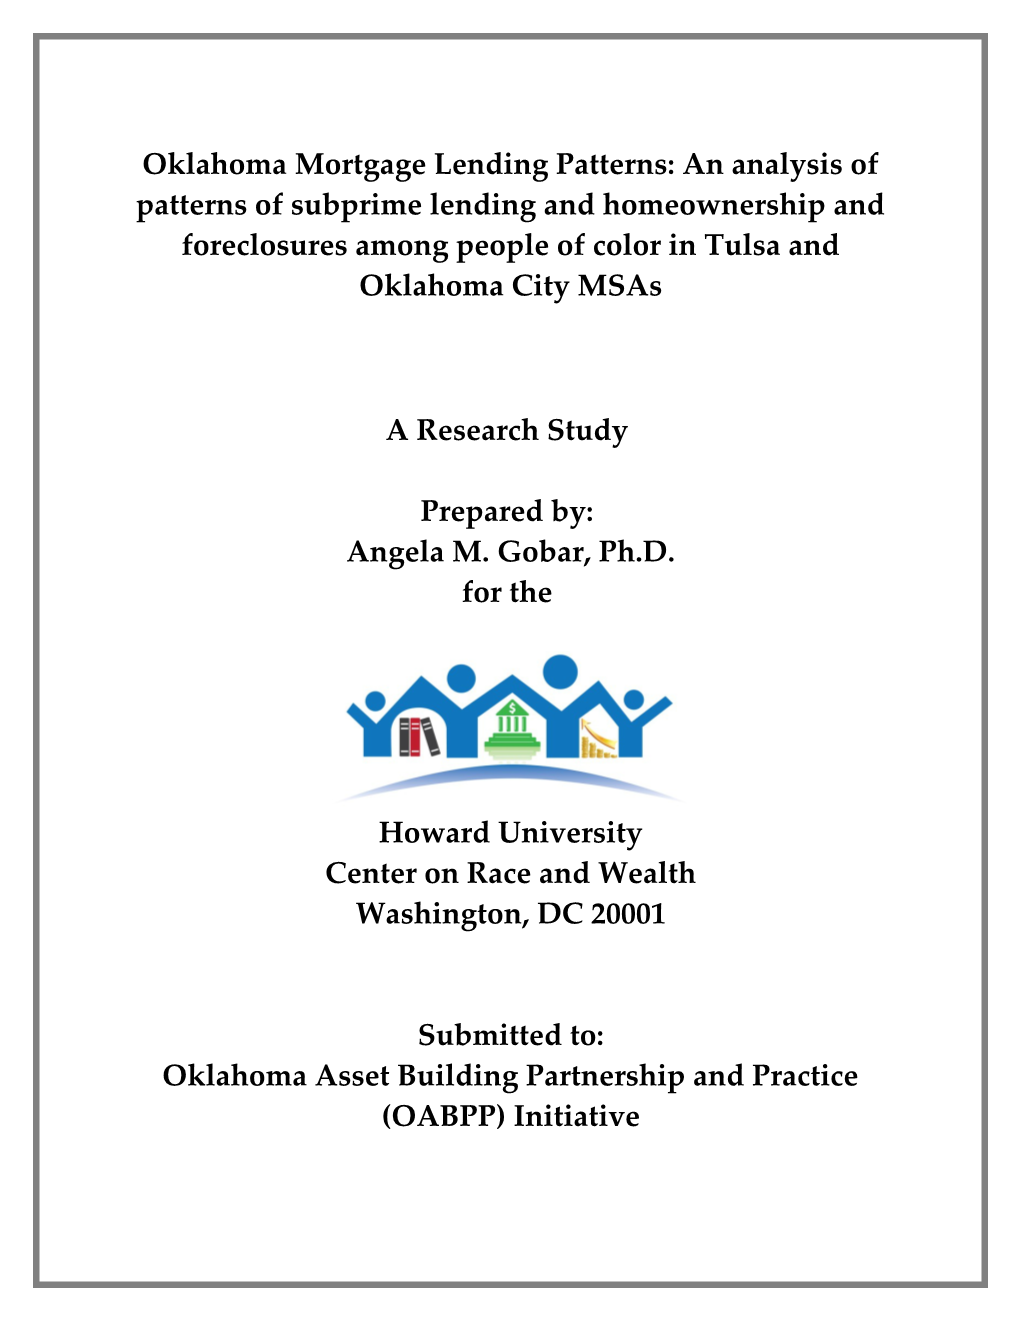 Oklahoma Mortgage Lending Patterns: an Analysis of Patterns of Subprime Lending And